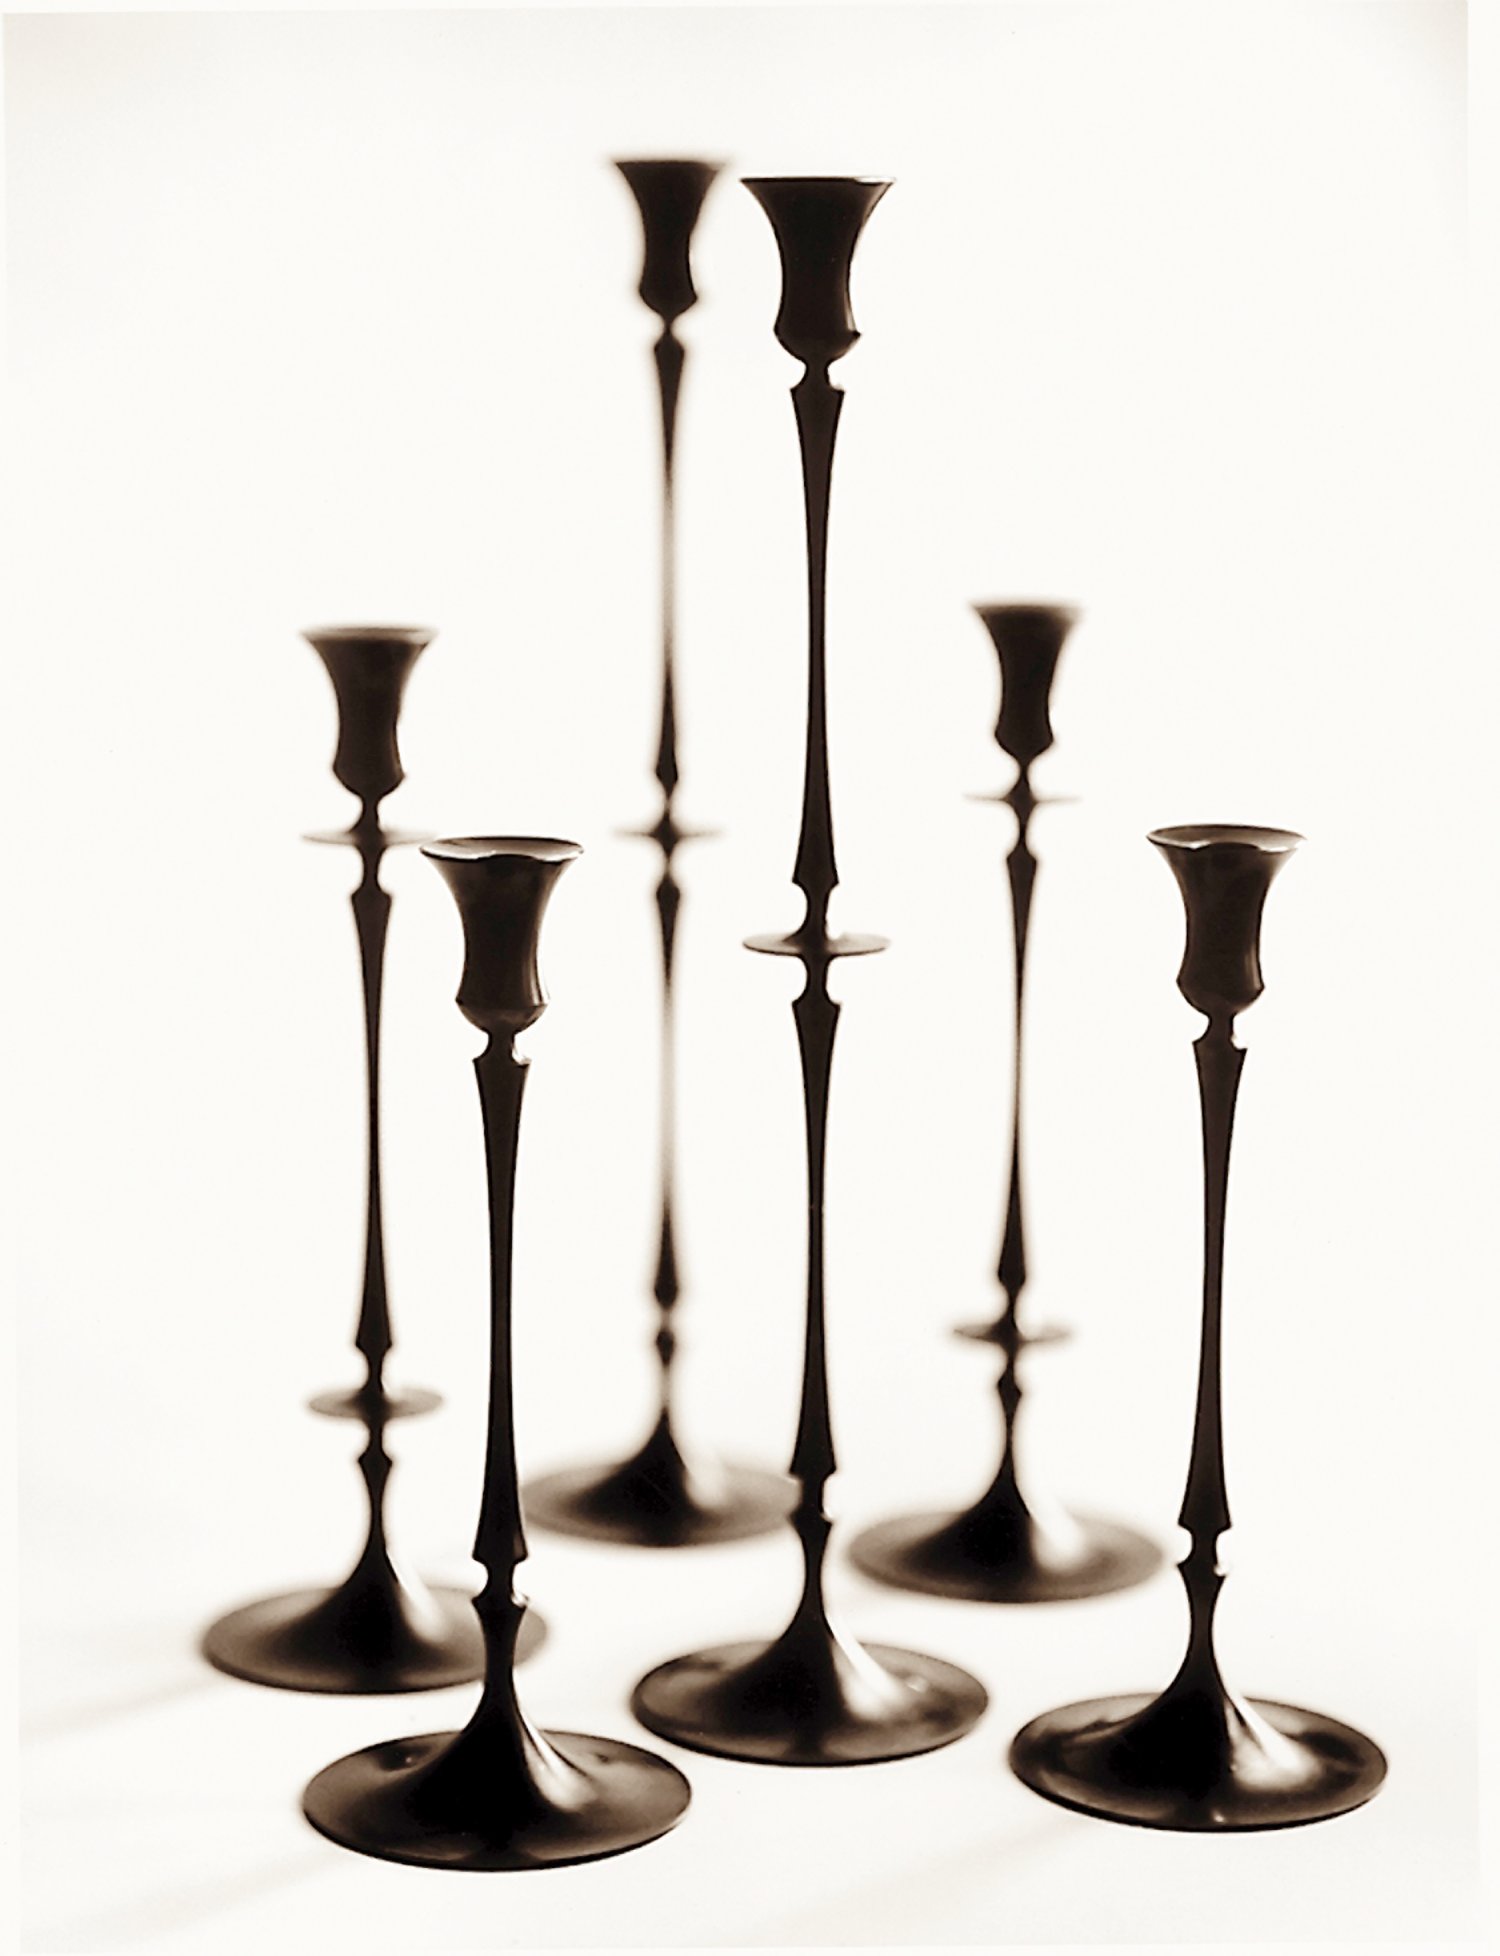 Bronze Butler — E.R. Candlesticks, Oxidized Swoon Biedermeier Muehling by Ted